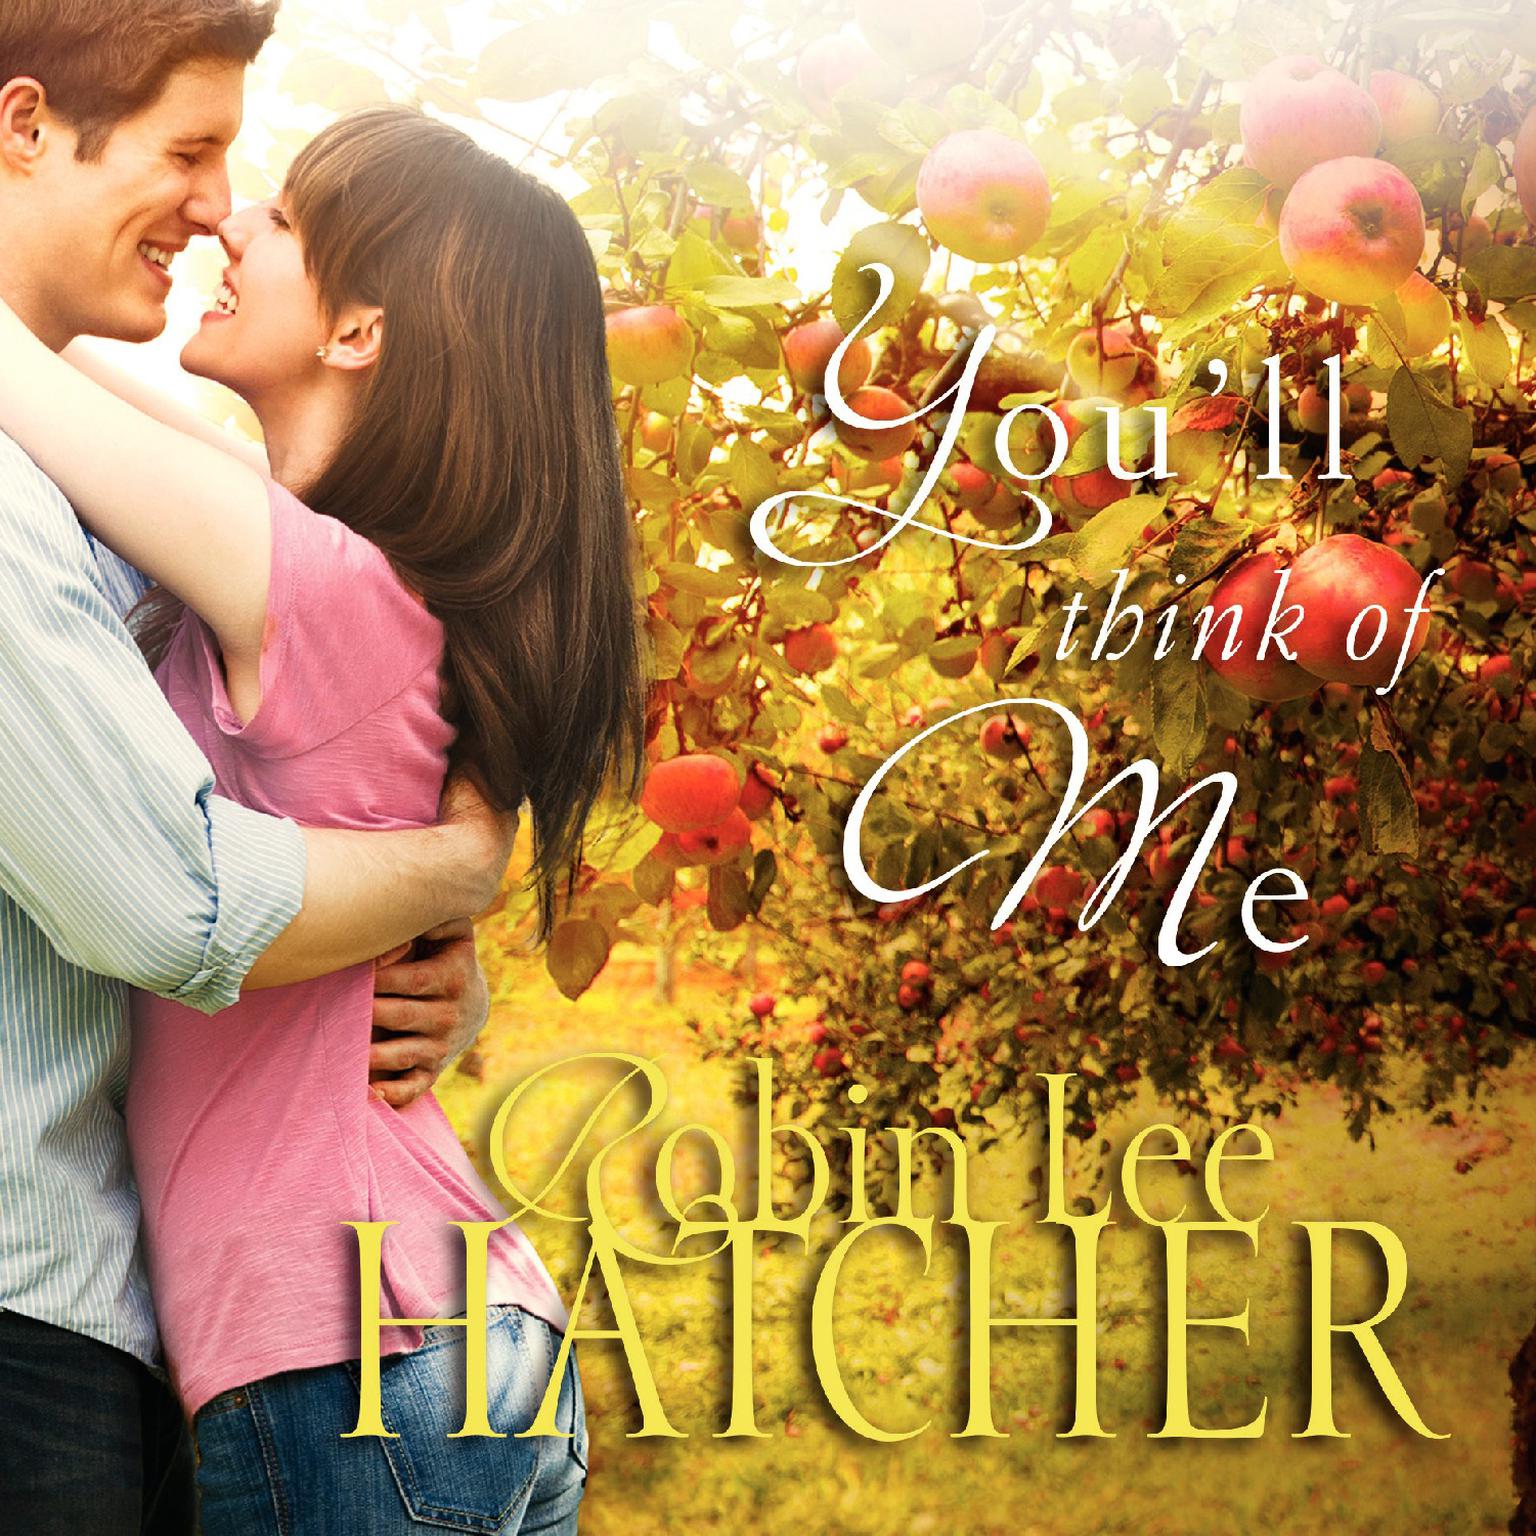 Youll Think of Me Audiobook, by Robin Lee Hatcher